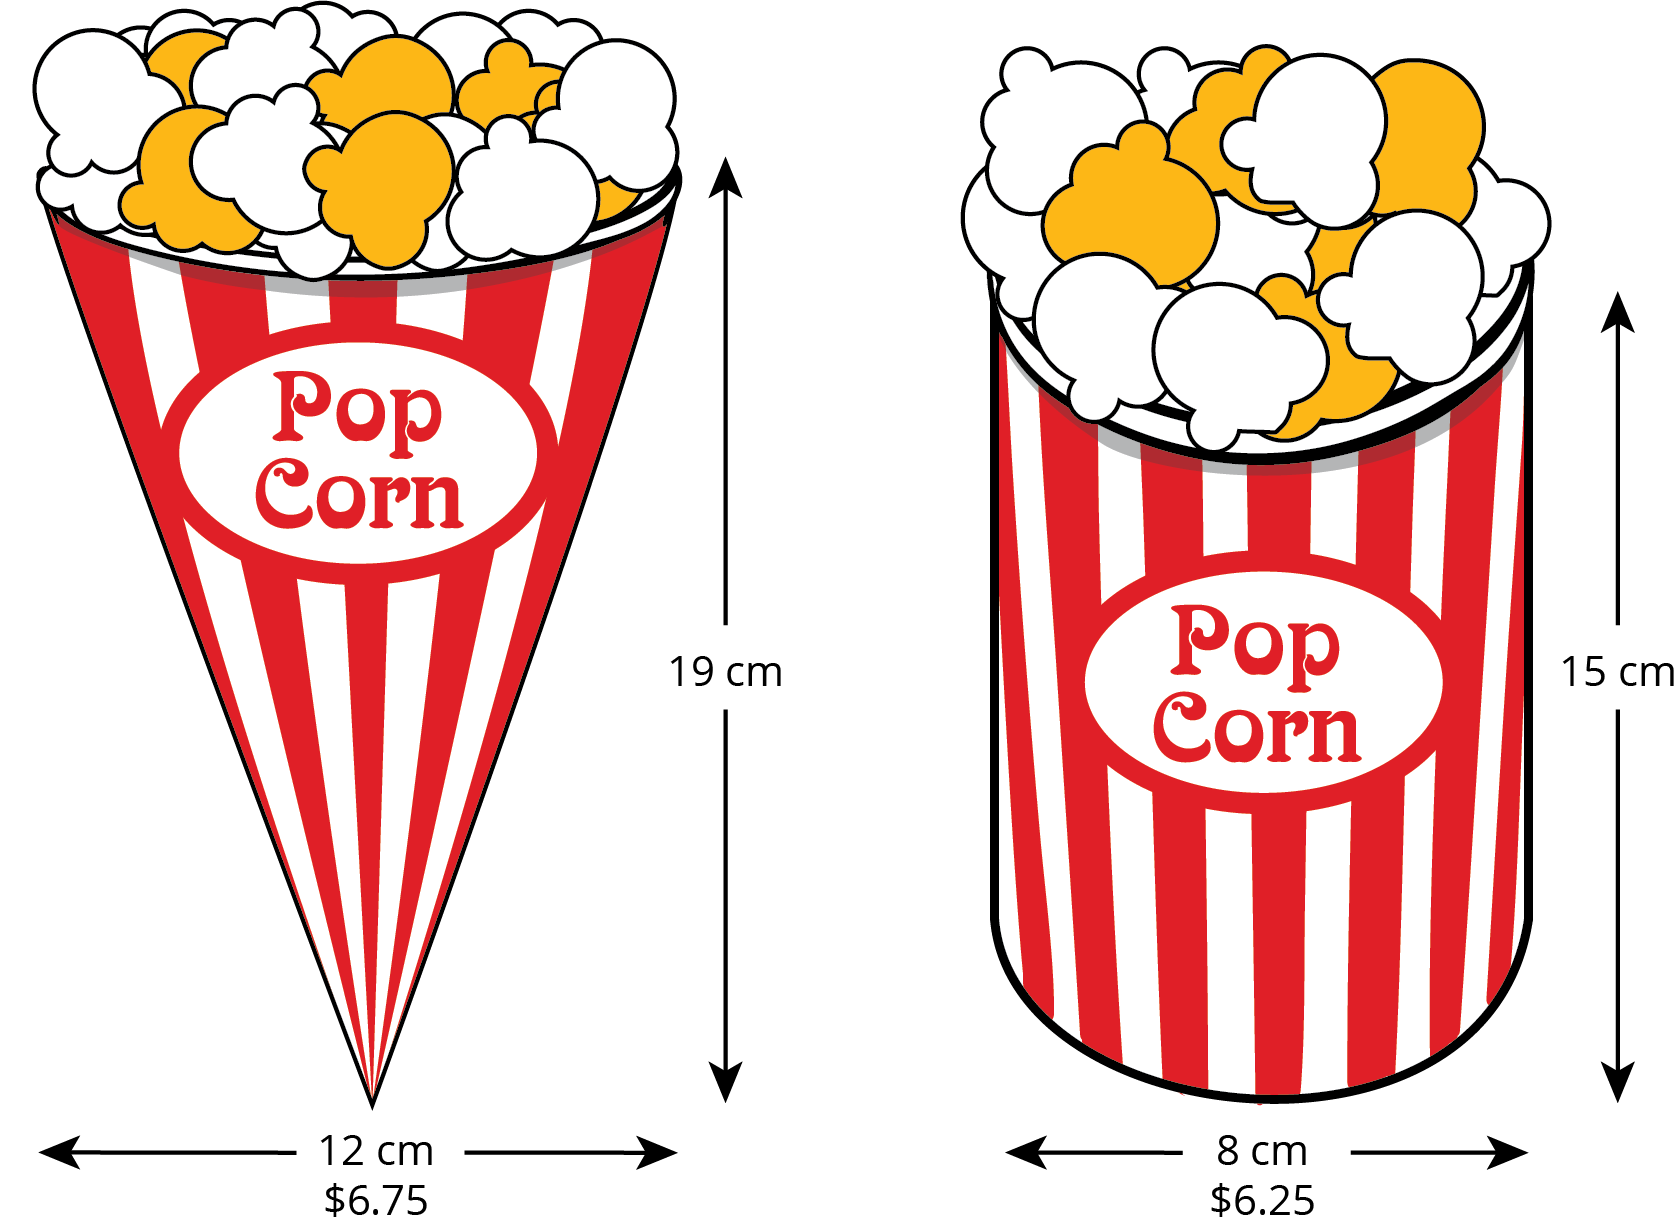 An image of two containers of popcorn. The first container of popcorn is shaped like a cone. The distance from the edge of the opening to the point at the bottom is labeled 19 centimeters. The distance that passes through the center of the circlular base from one edge of the opening to the other edge of the opening is 12 centimeters. The price is labeled as 6 point 7 5 dollars. The second container of popcorn is shaped like a cylinder. The horizontal distance from the edge of the opening to the bottom of the container is 15 centimeters. The distance that passes through the center of the circular base from one edge of the opening to the other edge of the opening is 8 centimeters. The price is labeled as 6 point 2 5 dollars.